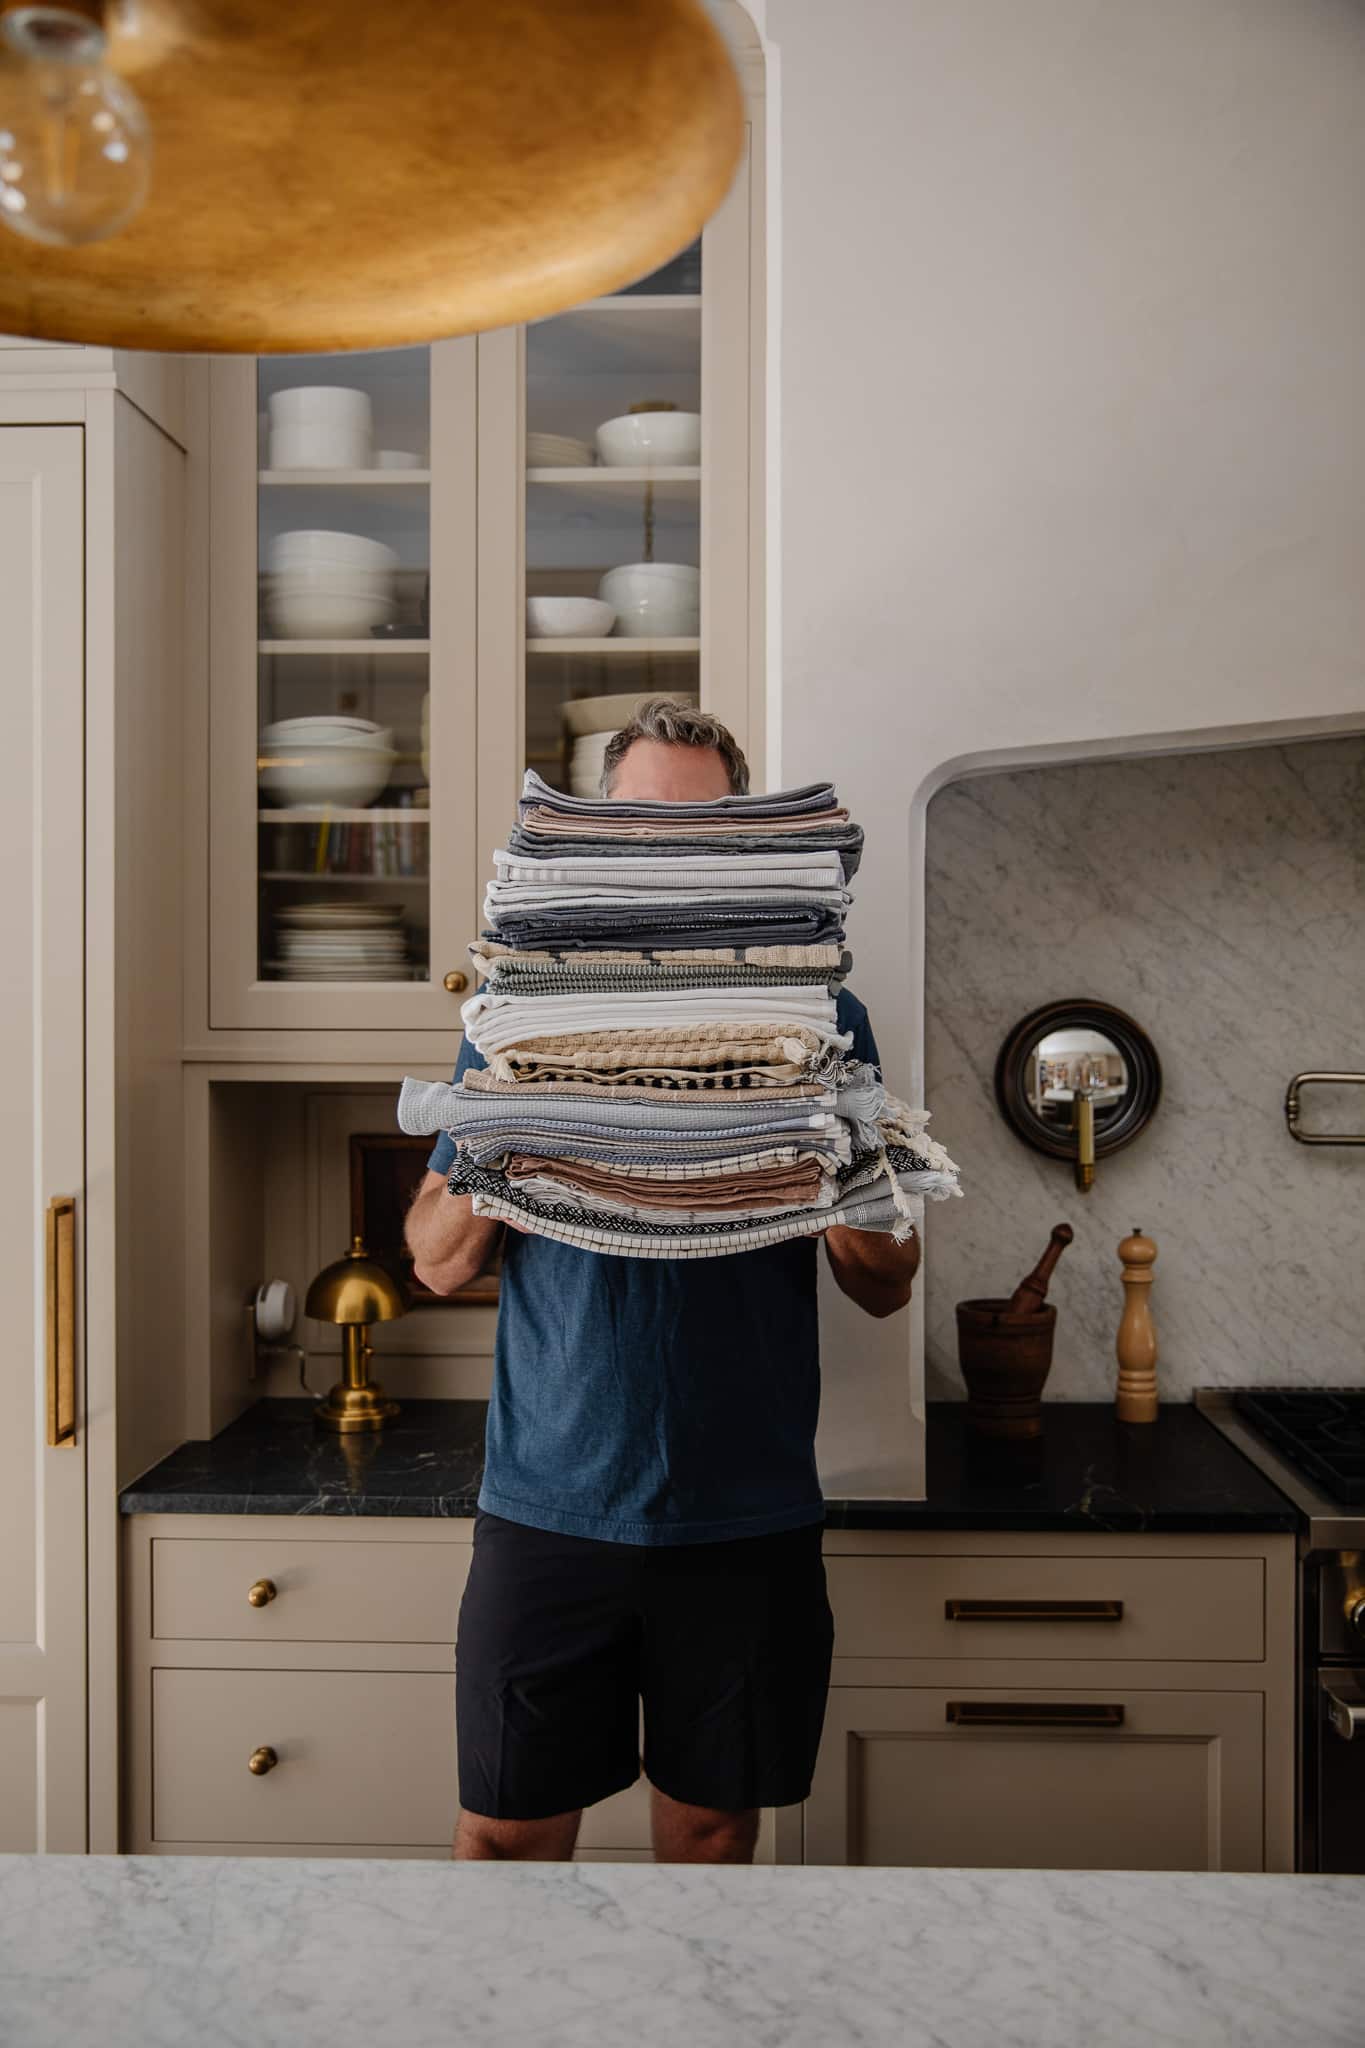 How to Wash Dish Towels (No Matter How Dingy They Are)